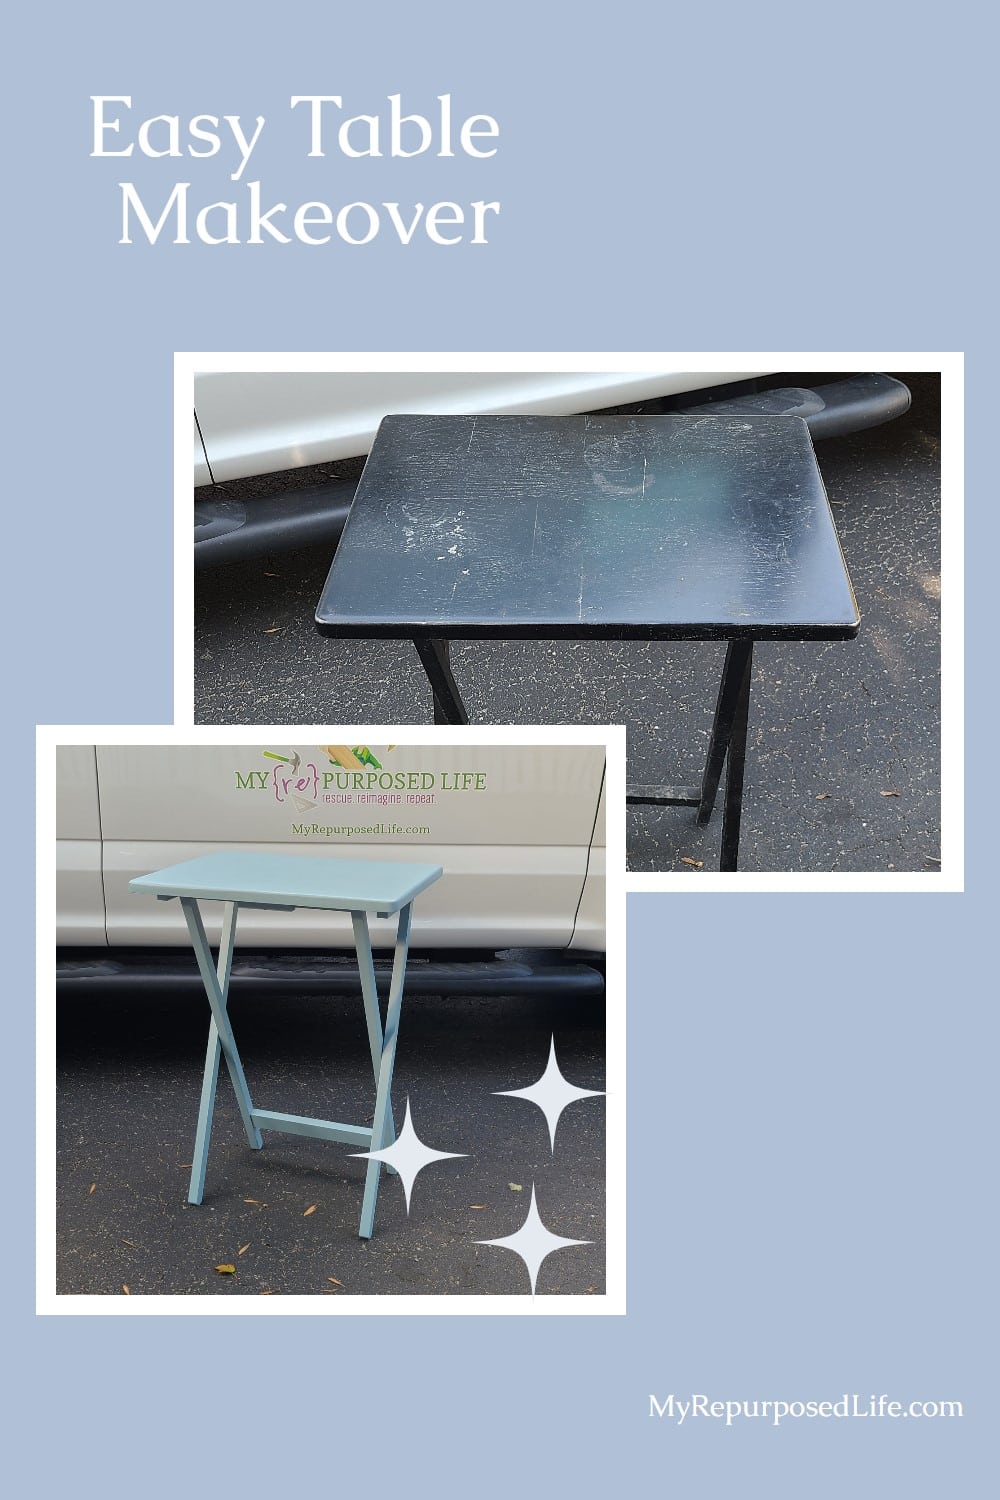 How to give an outdated folding tray table the perfect makeover. Tips for cleaning painting and more. Don't forget the underside of the table, little things like that make the difference. #MyRepurposedLife #furniture #makeover #htp #allinonepaint via @repurposedlife